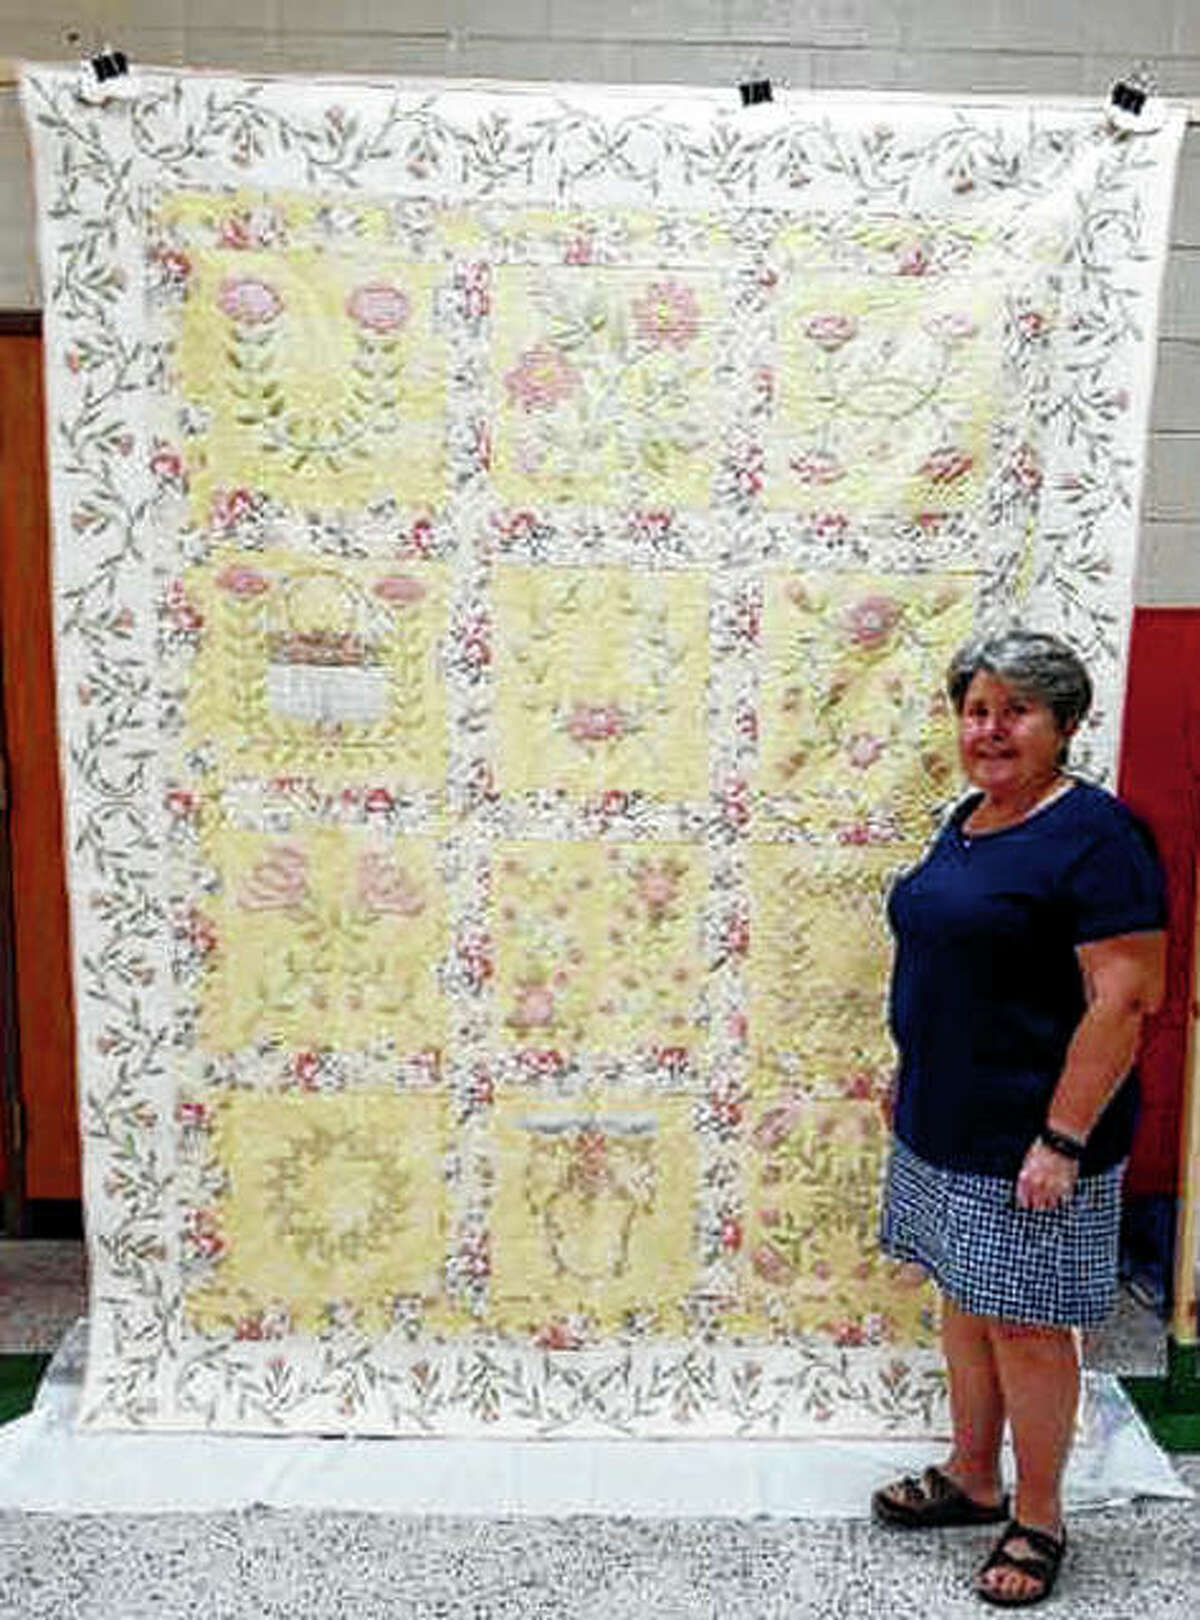 Judy Hayes of Jacksonville won the viewers’ choice quilt division award for her “Bespoke Blooms”.